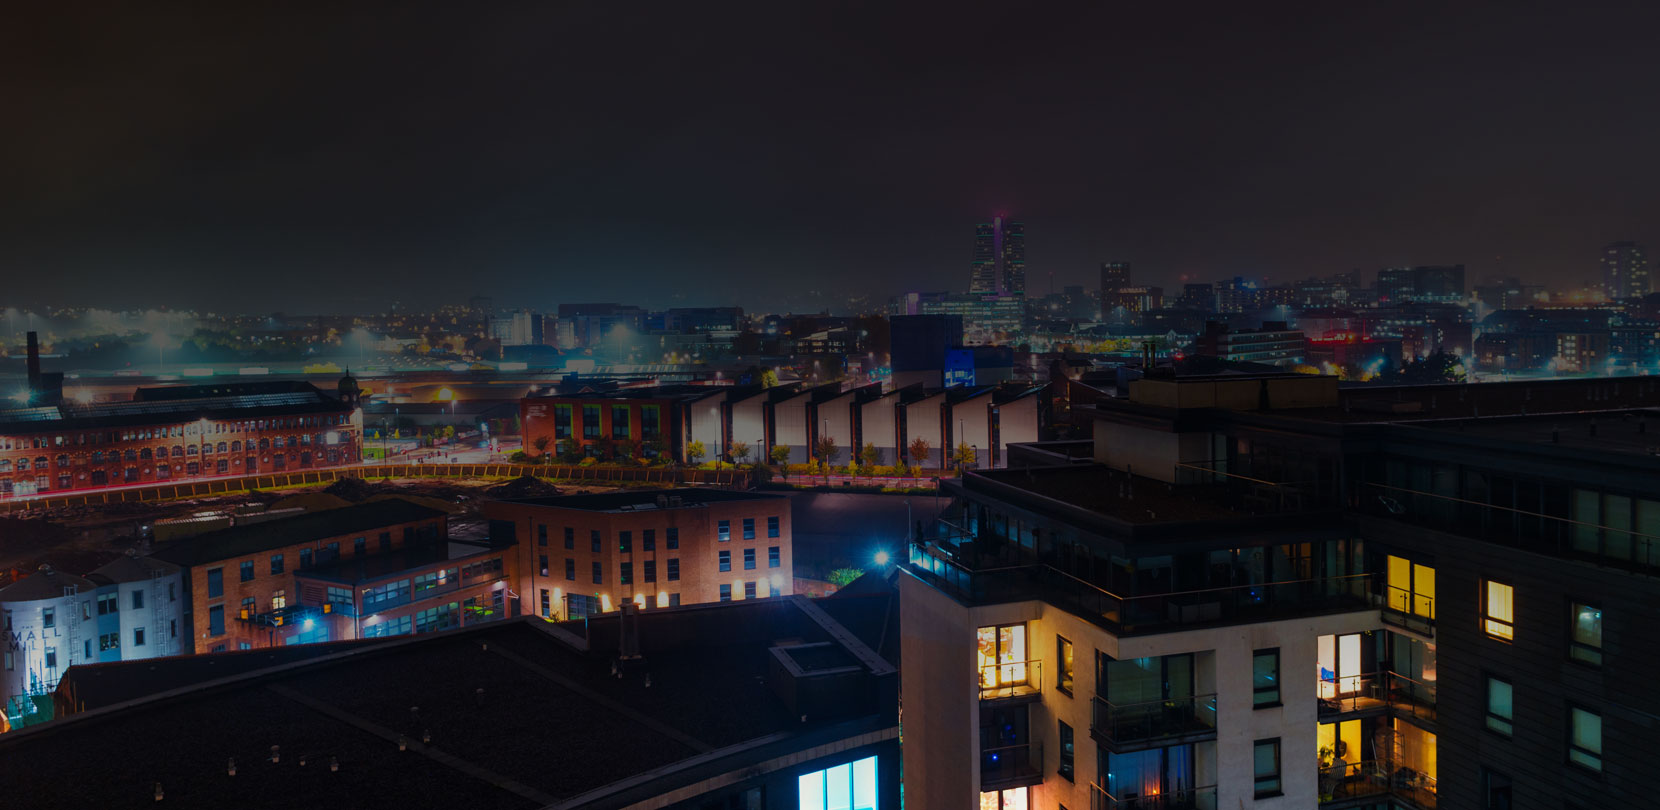 View of Leeds at night